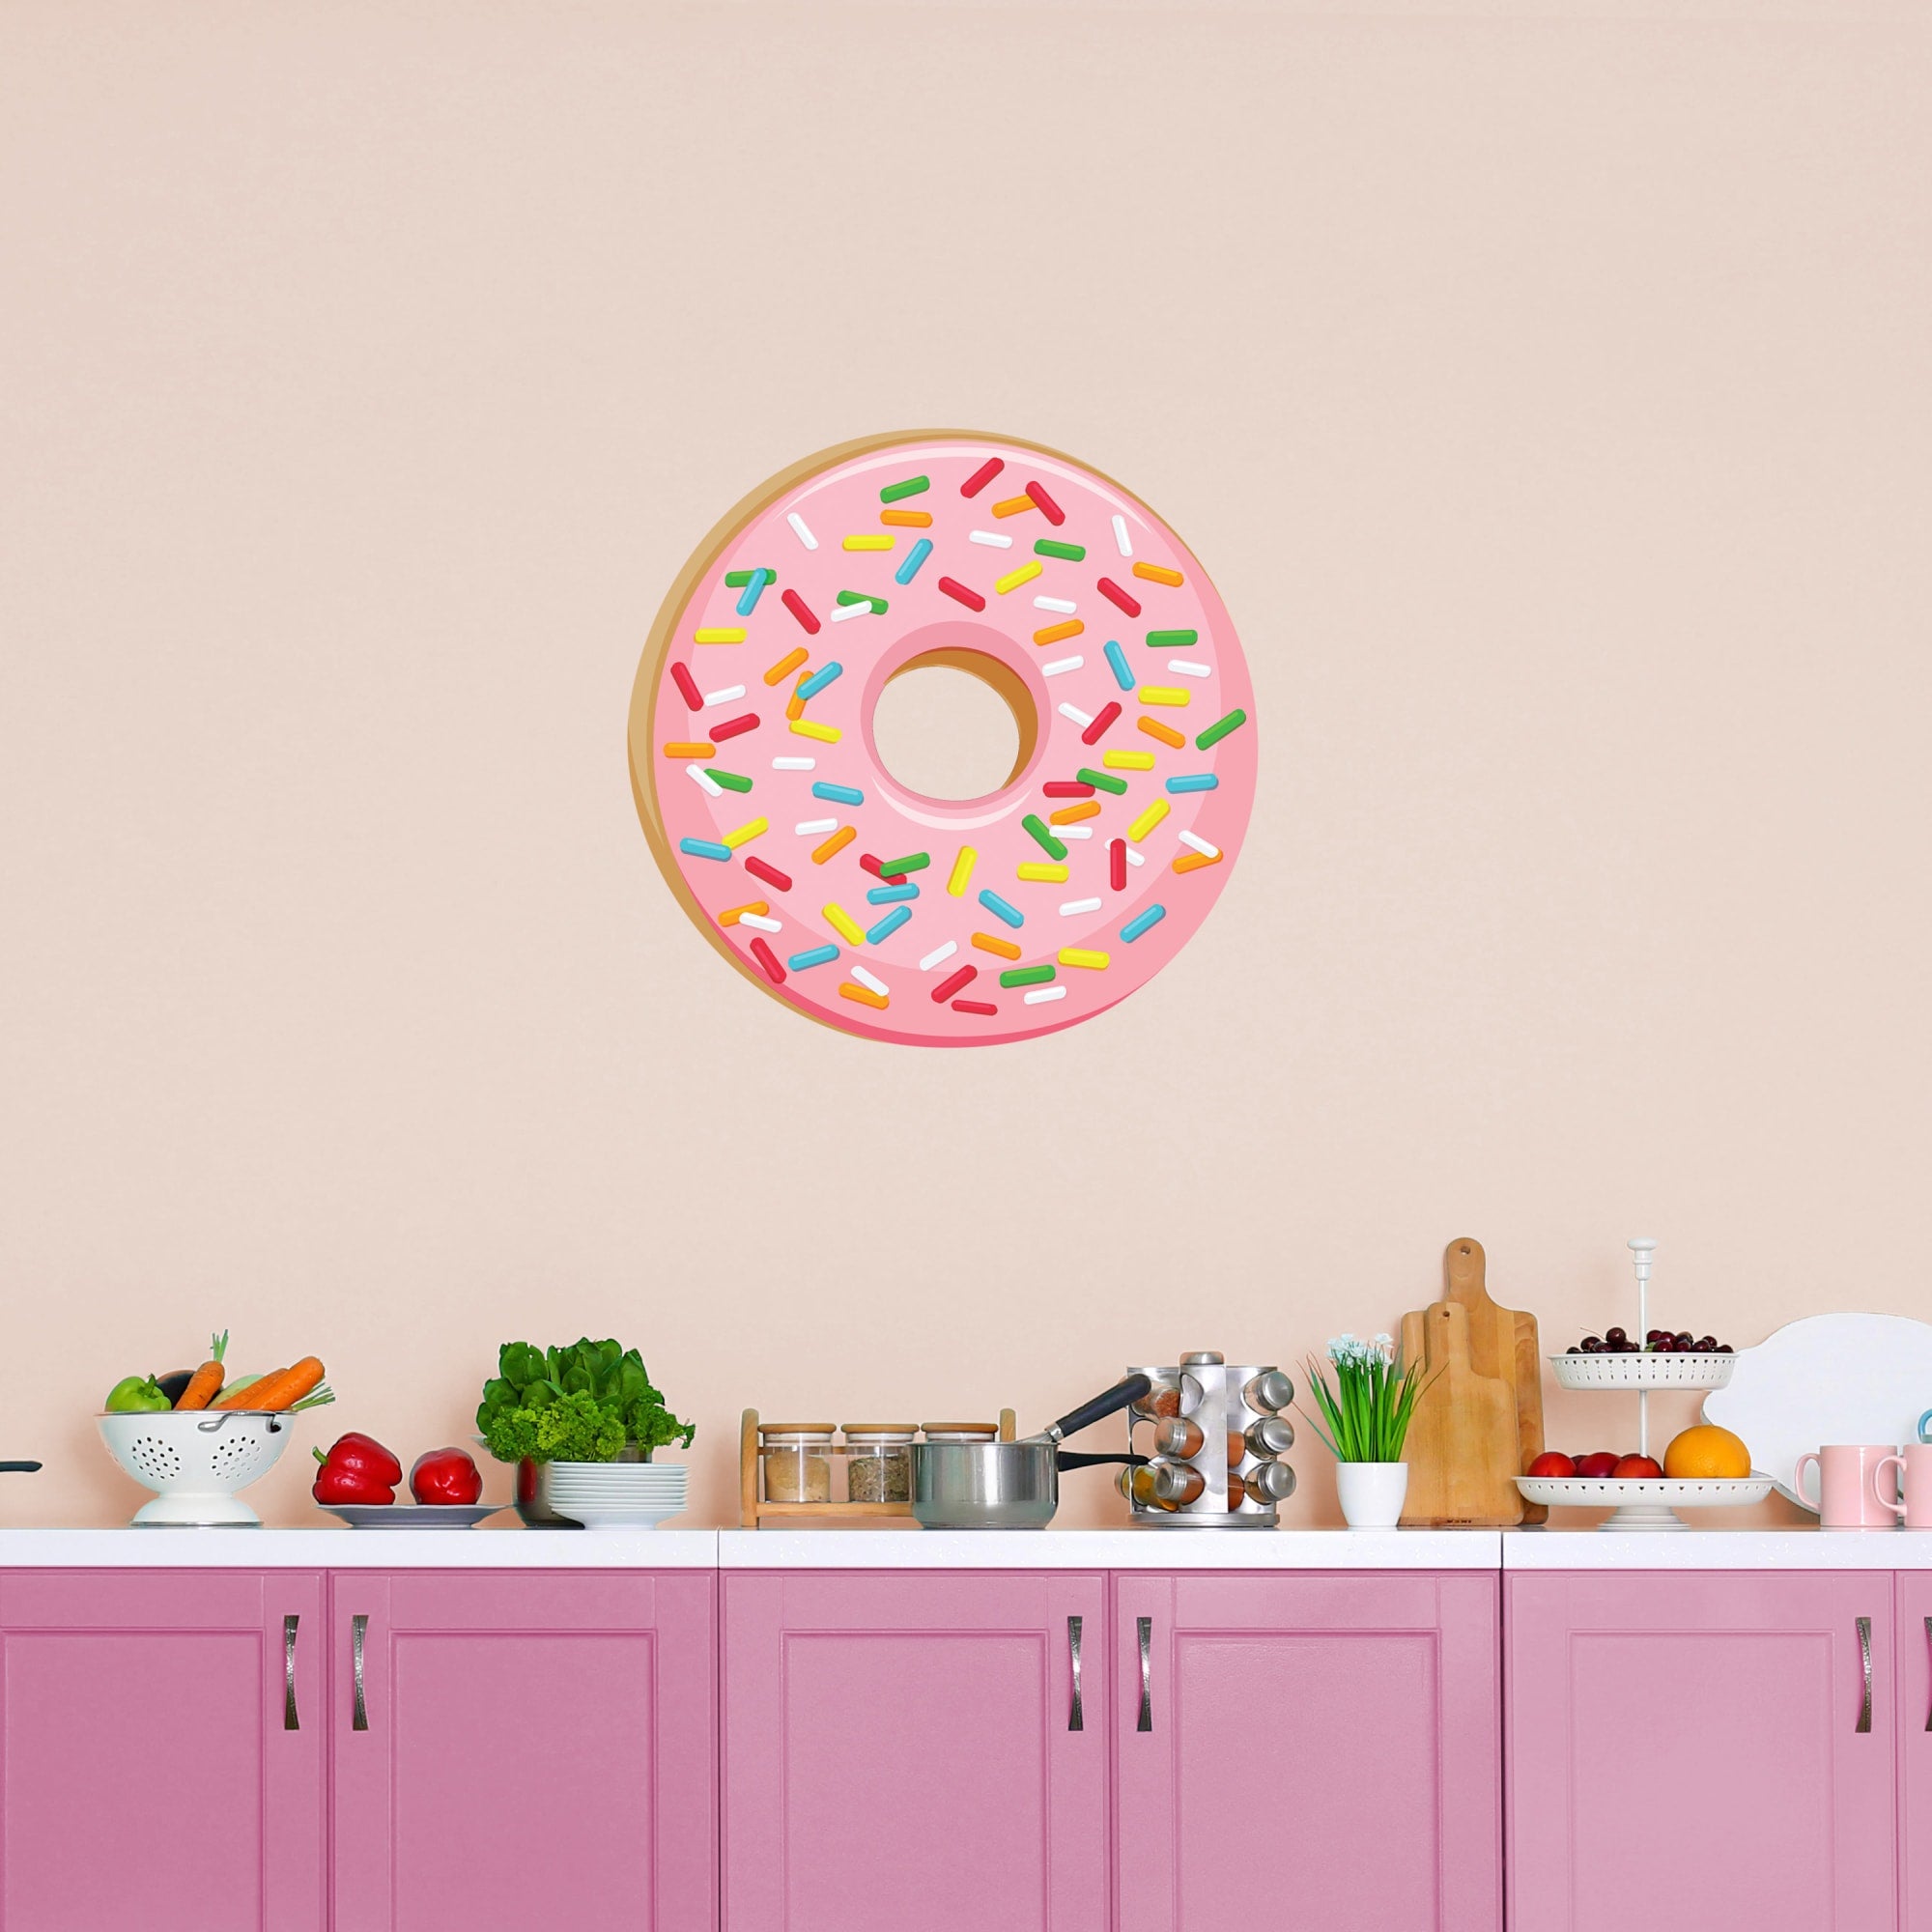 Donut: Illustrated - Removable Vinyl Decal XL by Fathead